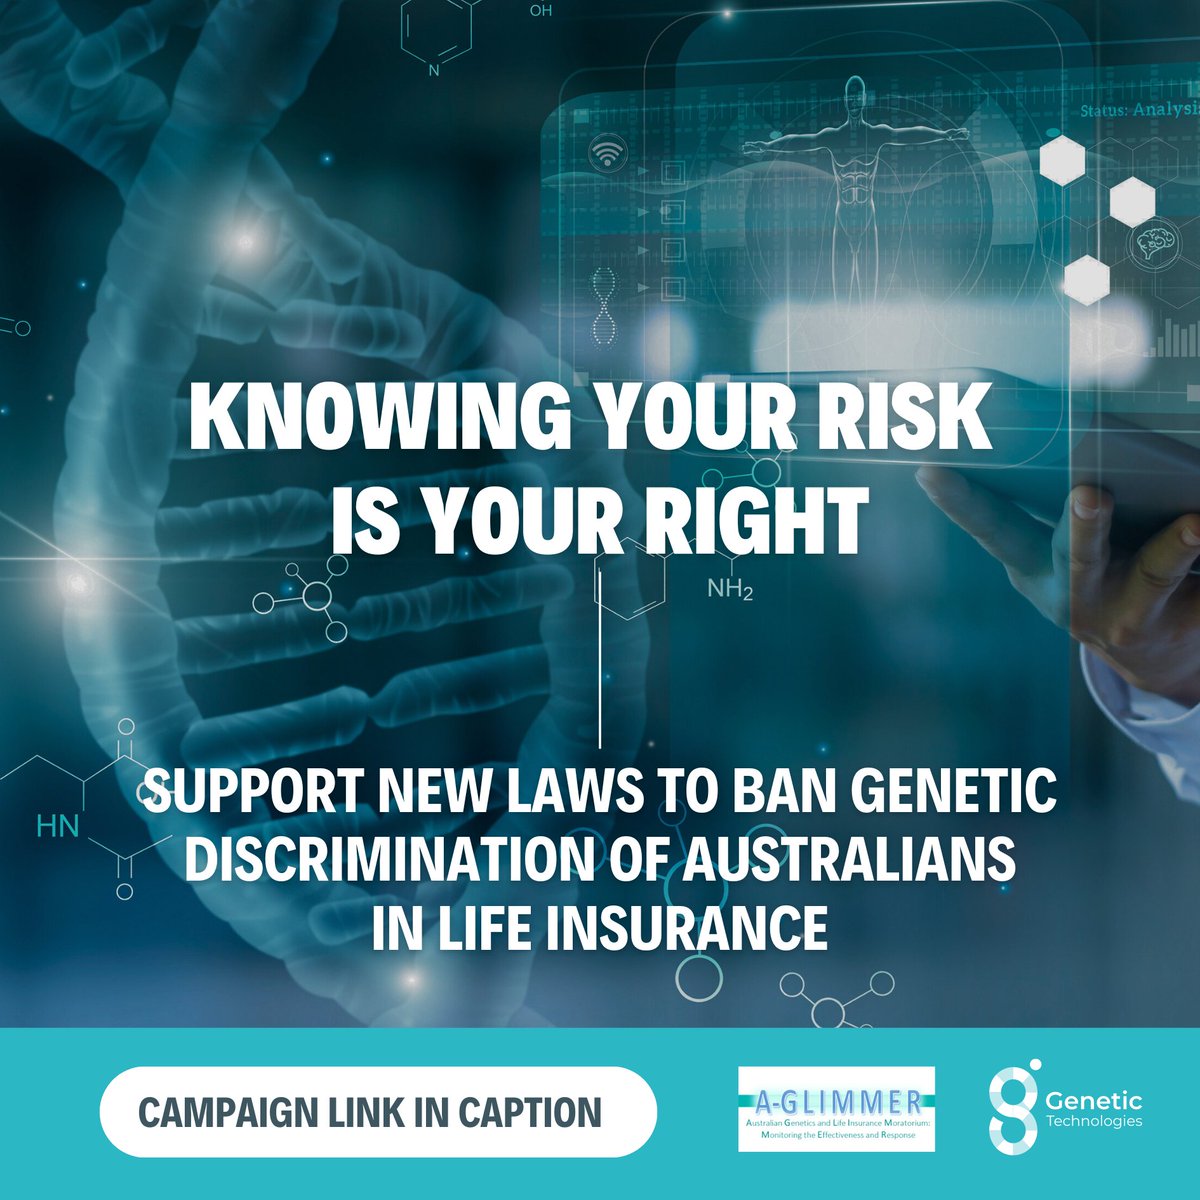 Did you know that genetic discrimination in Australian life insurance is legal? This fear of discrimination leads some people to choose not to have potentially life-saving #genetictesting or participate in #geneticresearch. Take action today: bit.ly/45uhmKP #genomics